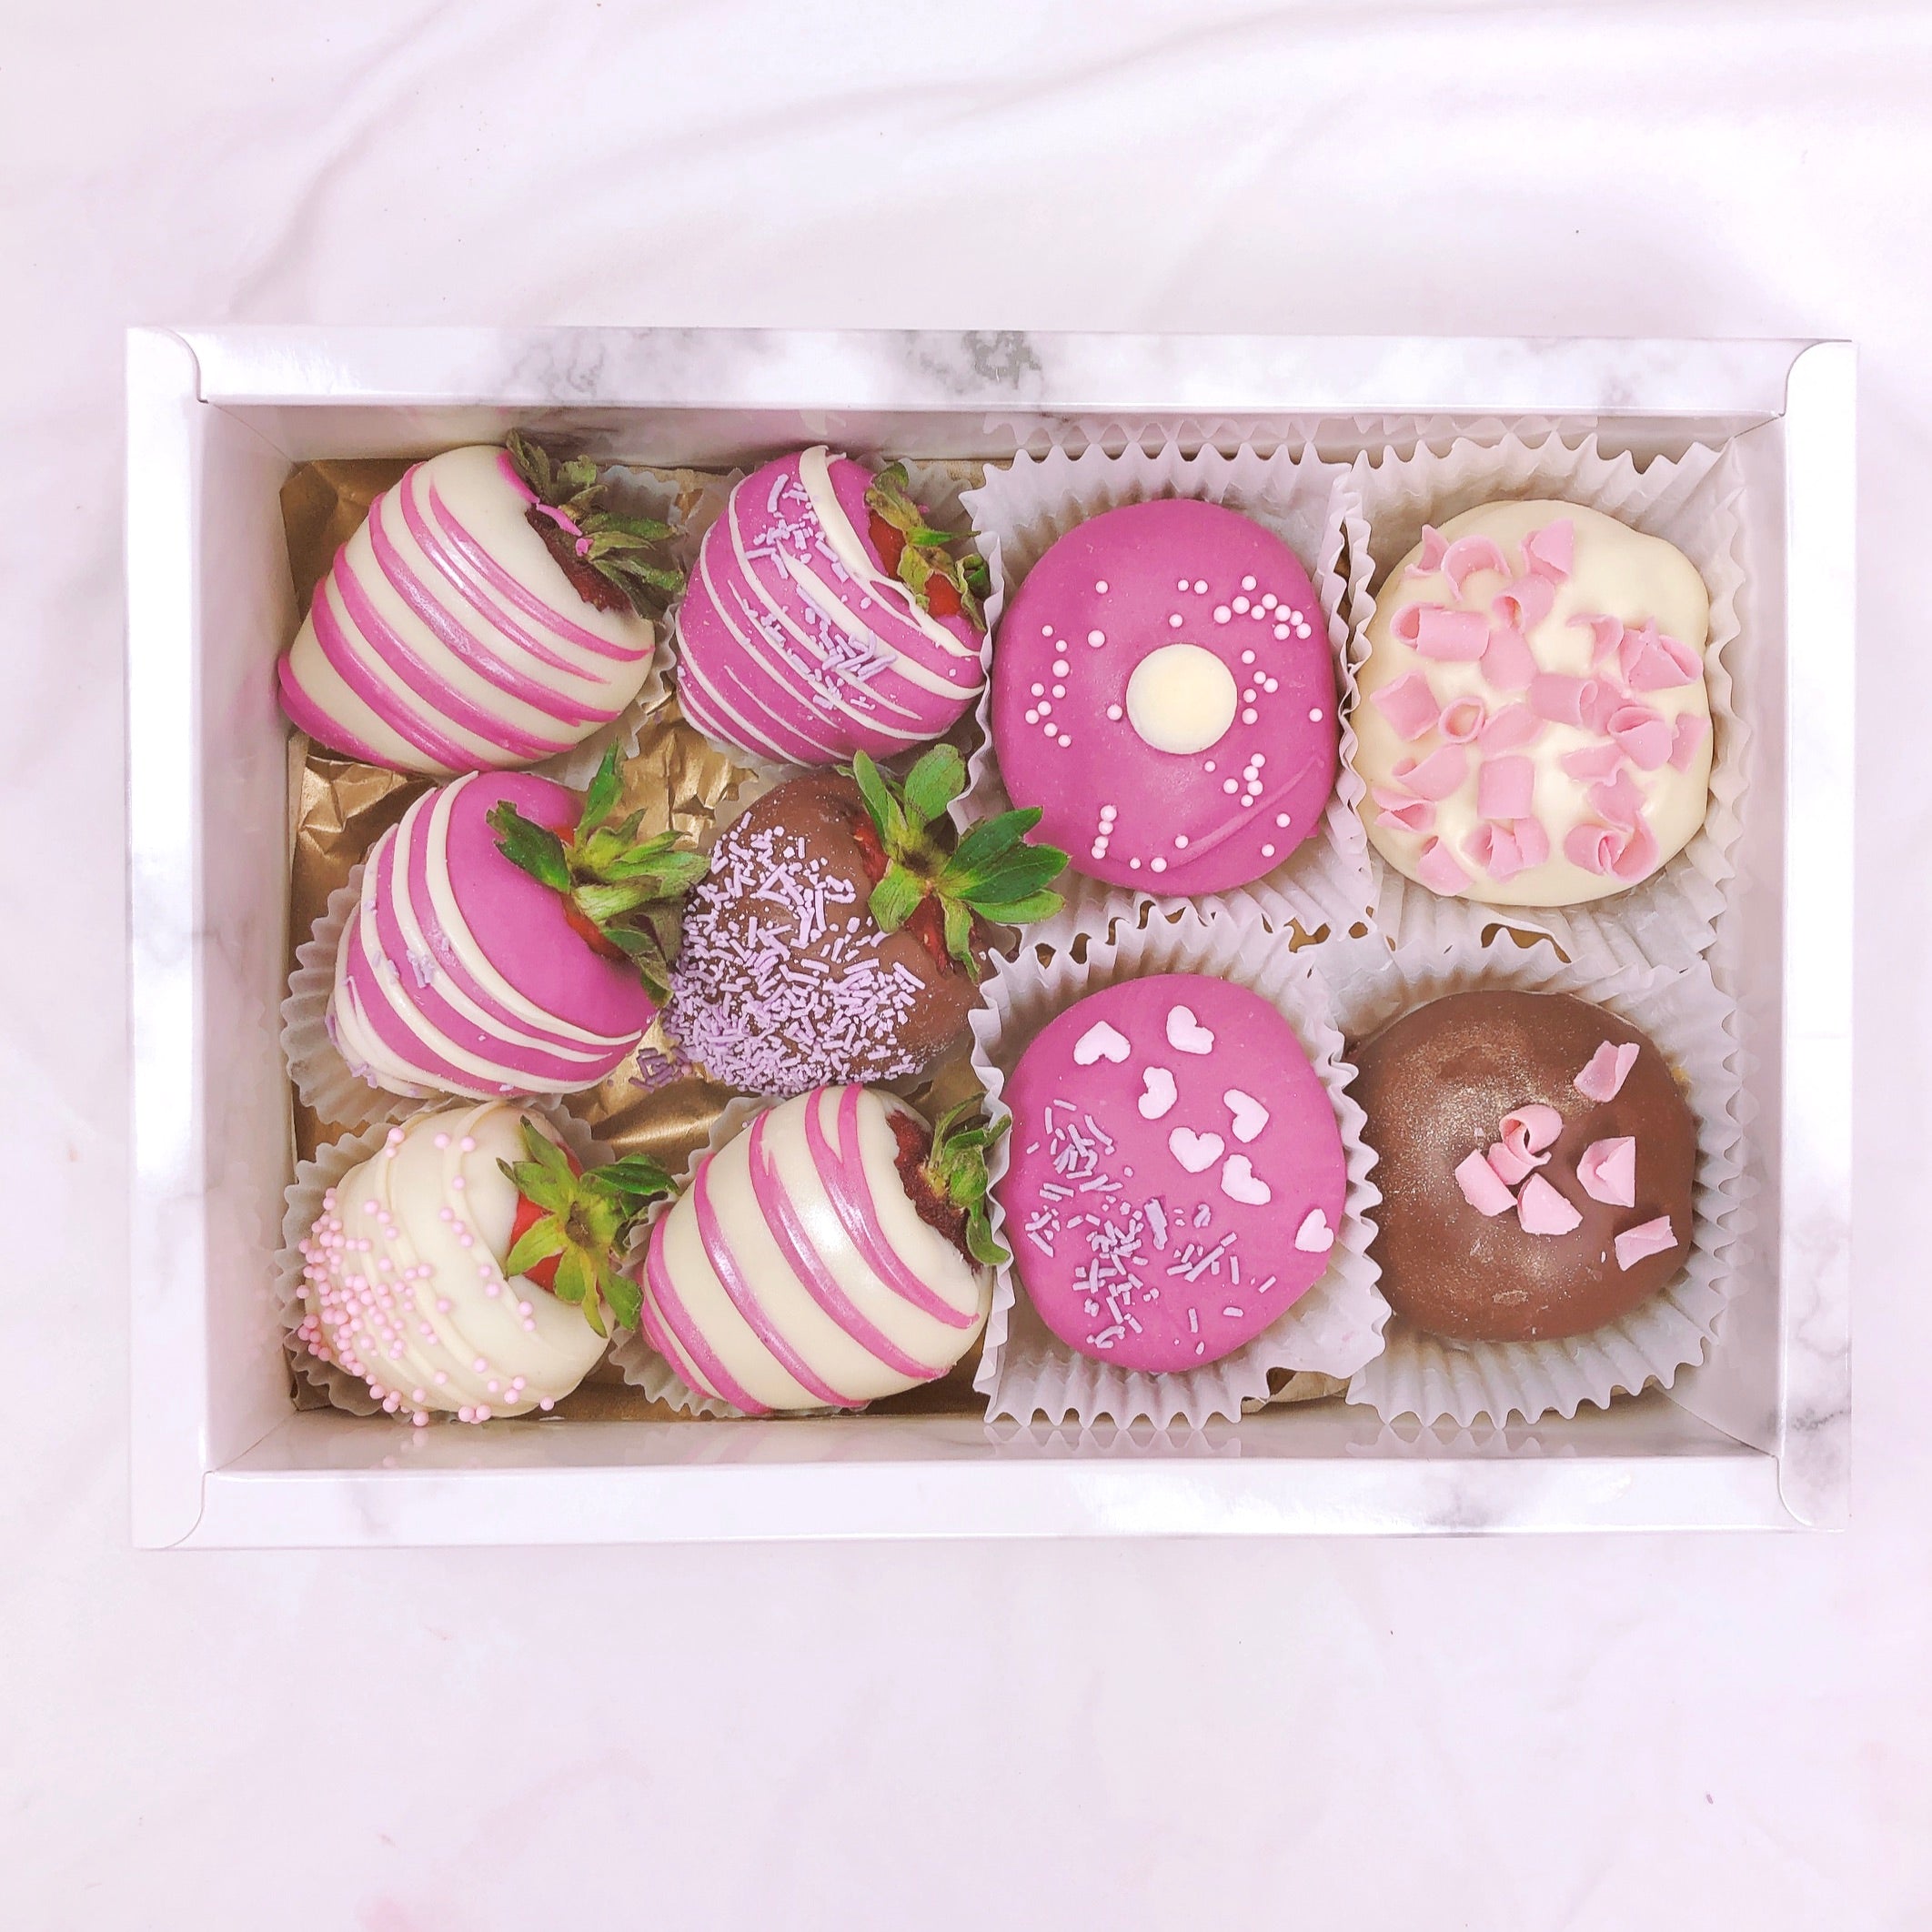 Chocolate covered strawberries and gourmet doughnuts in dessert box for same day delivery Adelaide